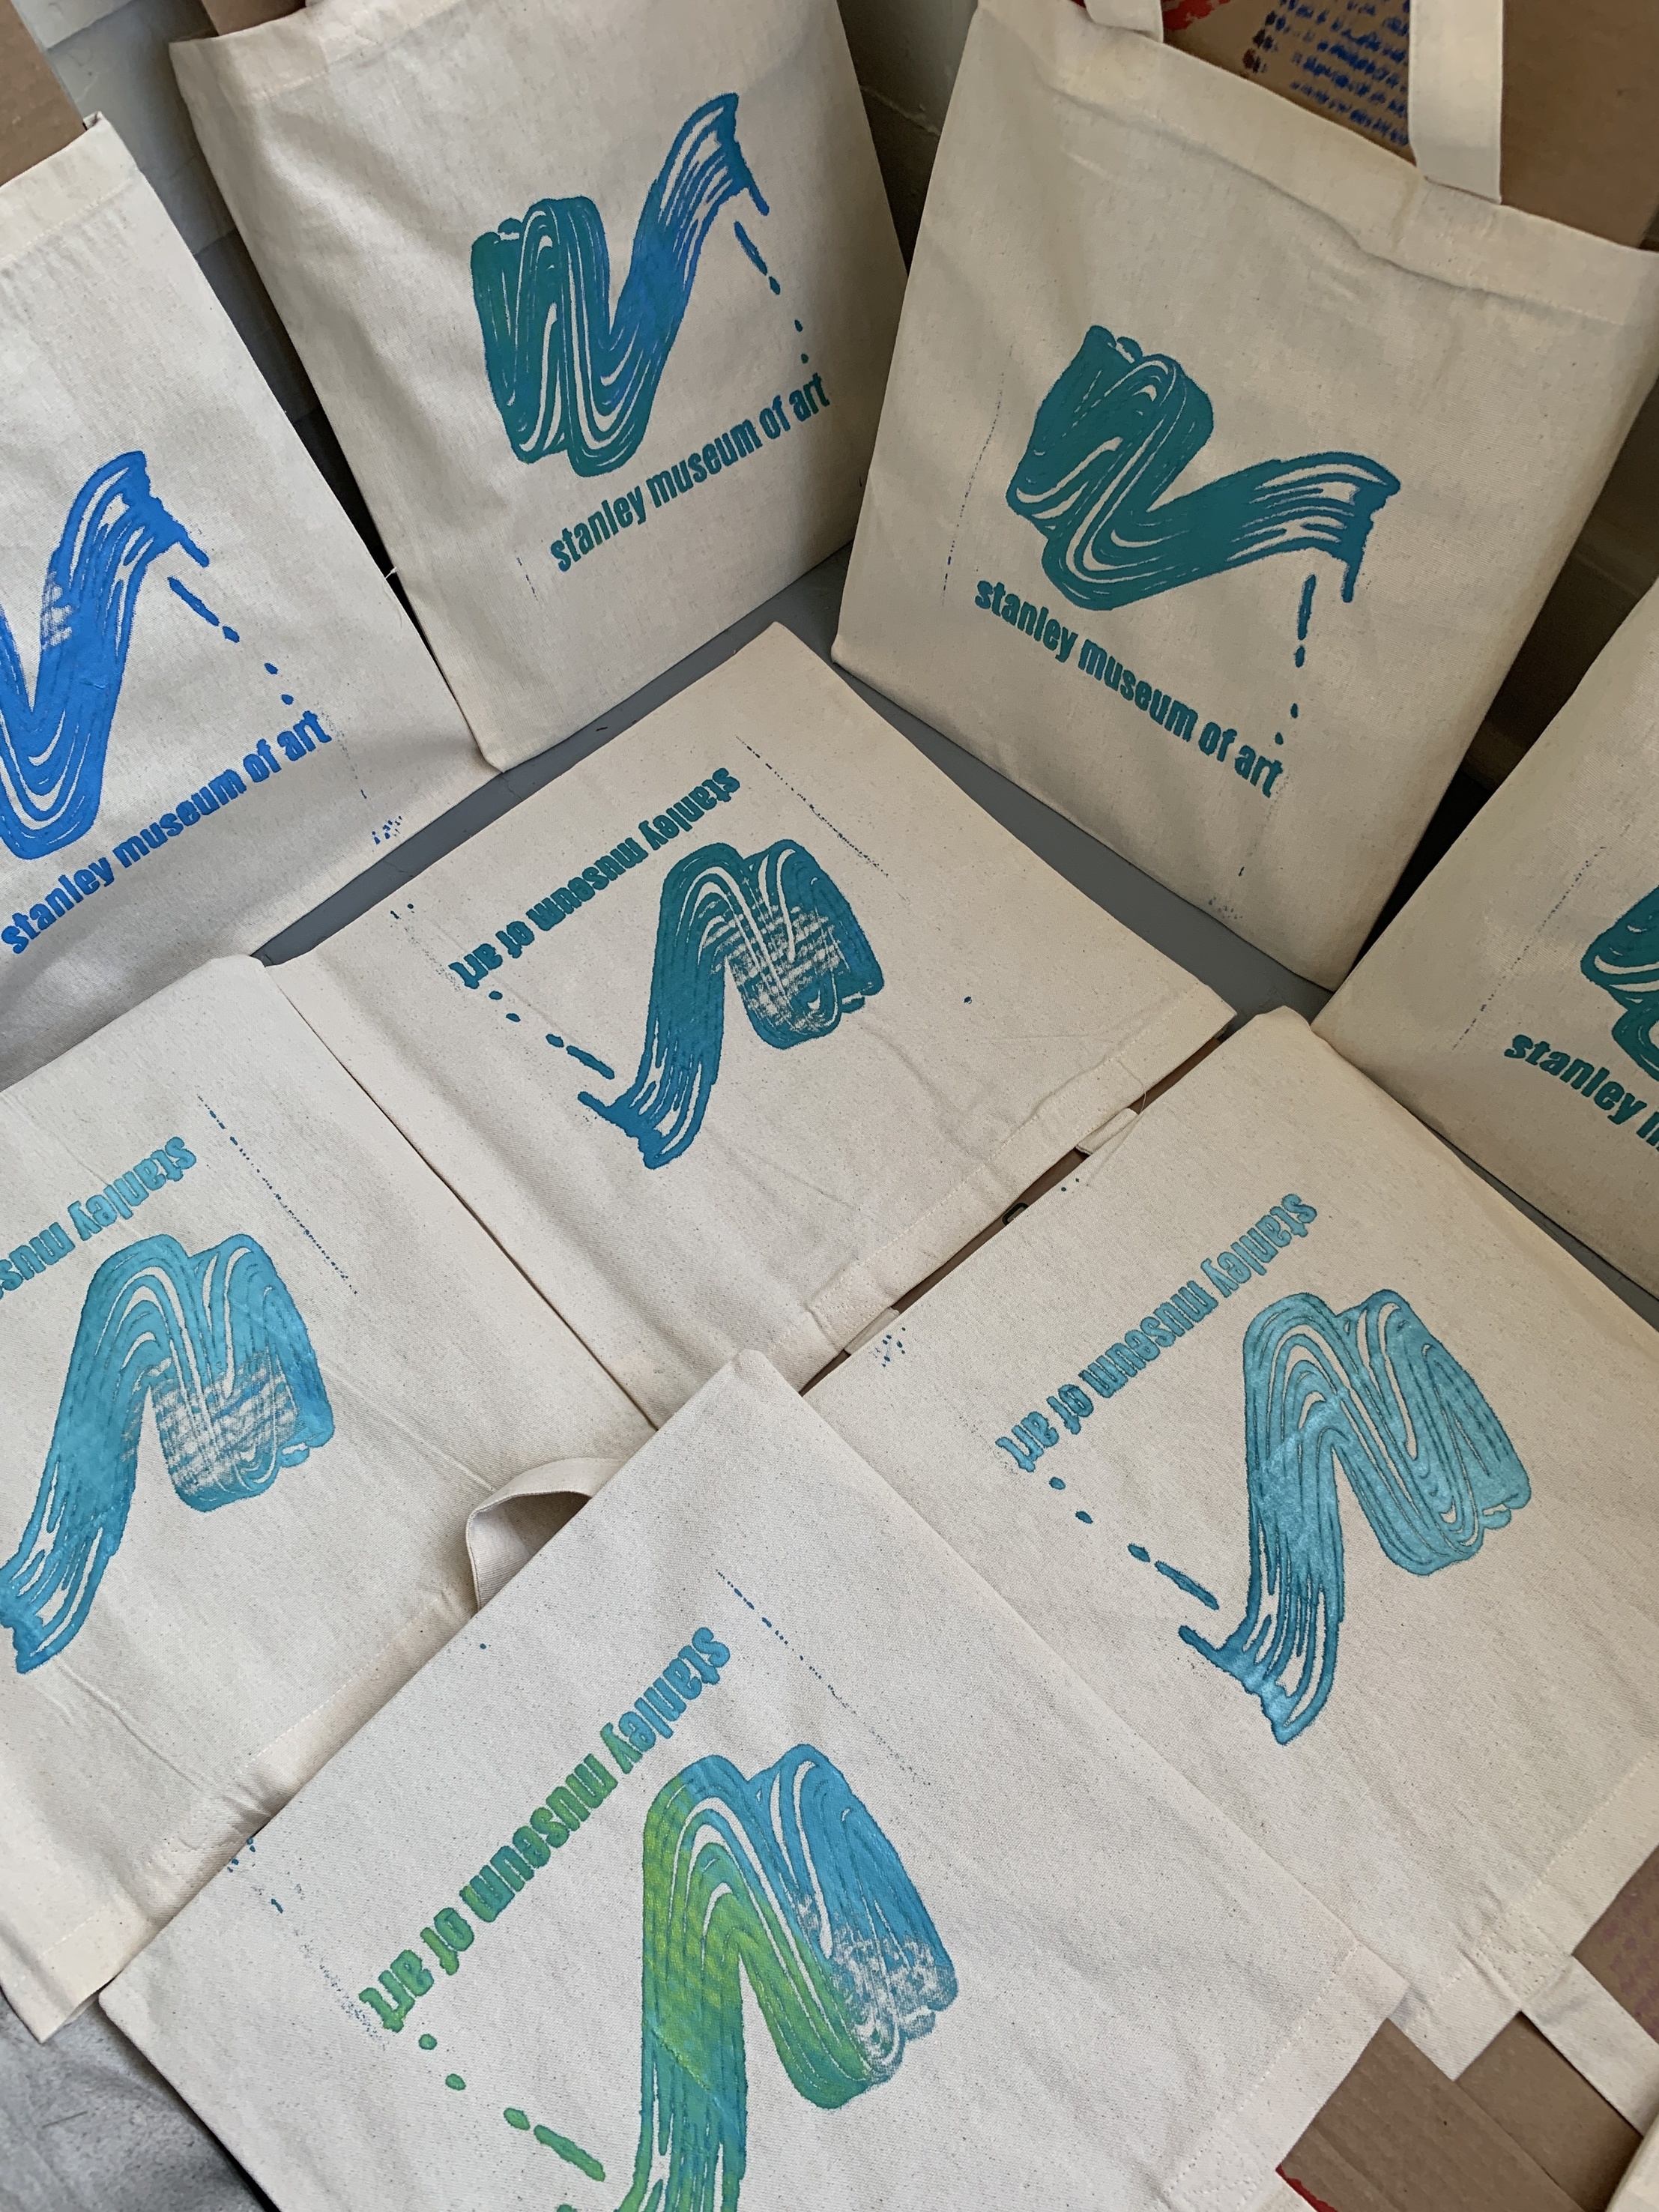 Tote bags imprinted with a paint brush swoosh and "Stanley Campus Council"